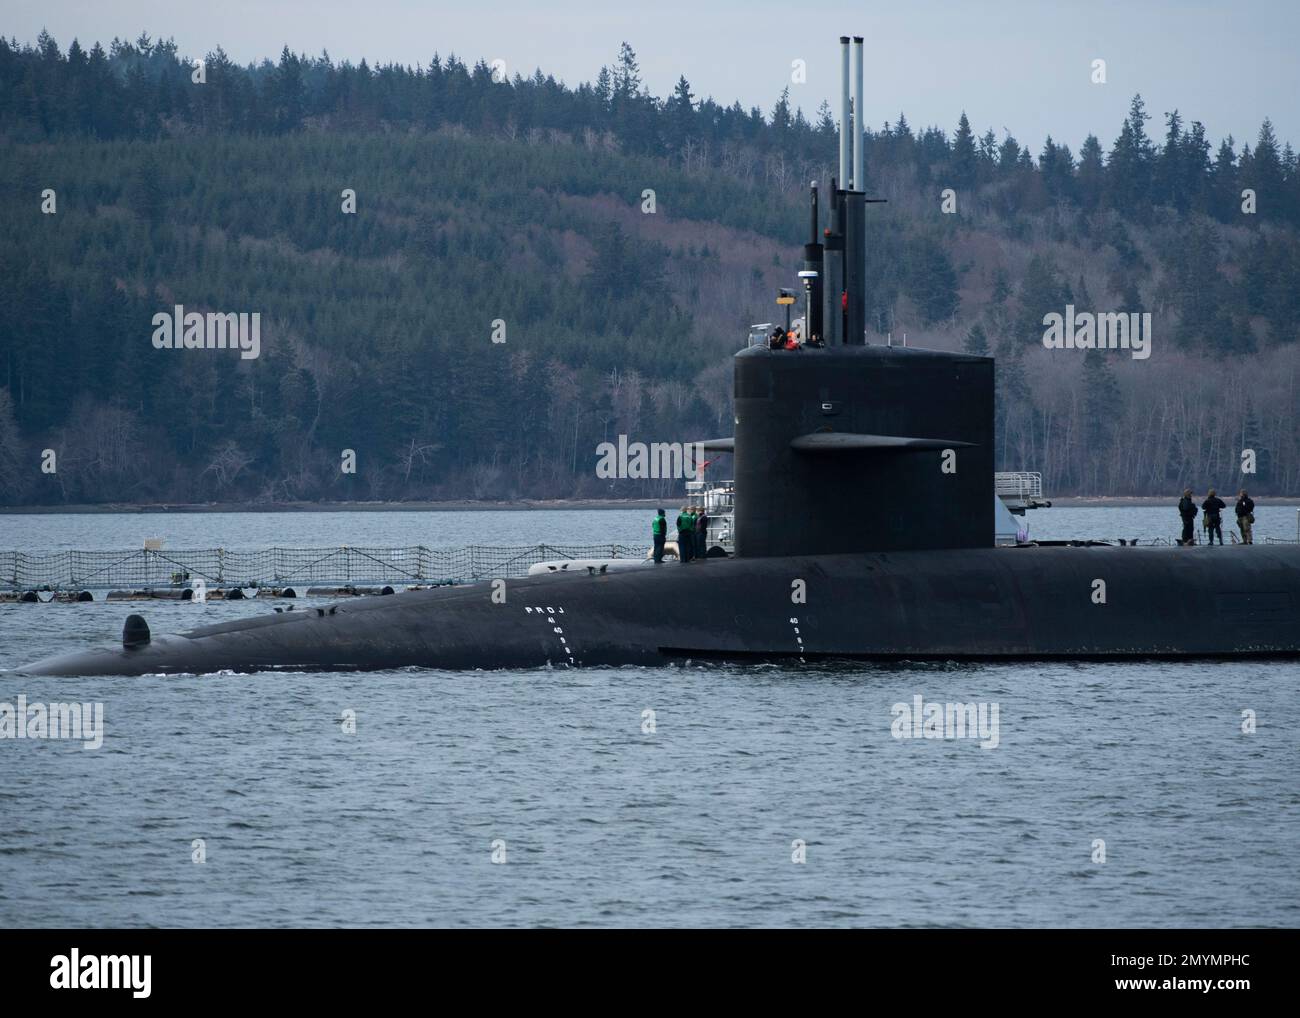 230202-N-CE703-1062    HOOD CANAL, Wash. (Feb. 2, 2023) – The Ohio-class ballistic missile submarine USS Maine (SSBN 741) transits the Hood Canal in preparation to moor at Naval Base Kitsap – Bangor, Washington, Feb. 3, 2023. Maine is one of eight ballistic-missile submarines stationed at Naval Base Kitsap-Bangor, providing the most survivable leg of the strategic deterrence triad for the United States. (U.S. Navy photo by Mass Communication Specialist 2nd Class Ian Zagrocki) Stock Photo